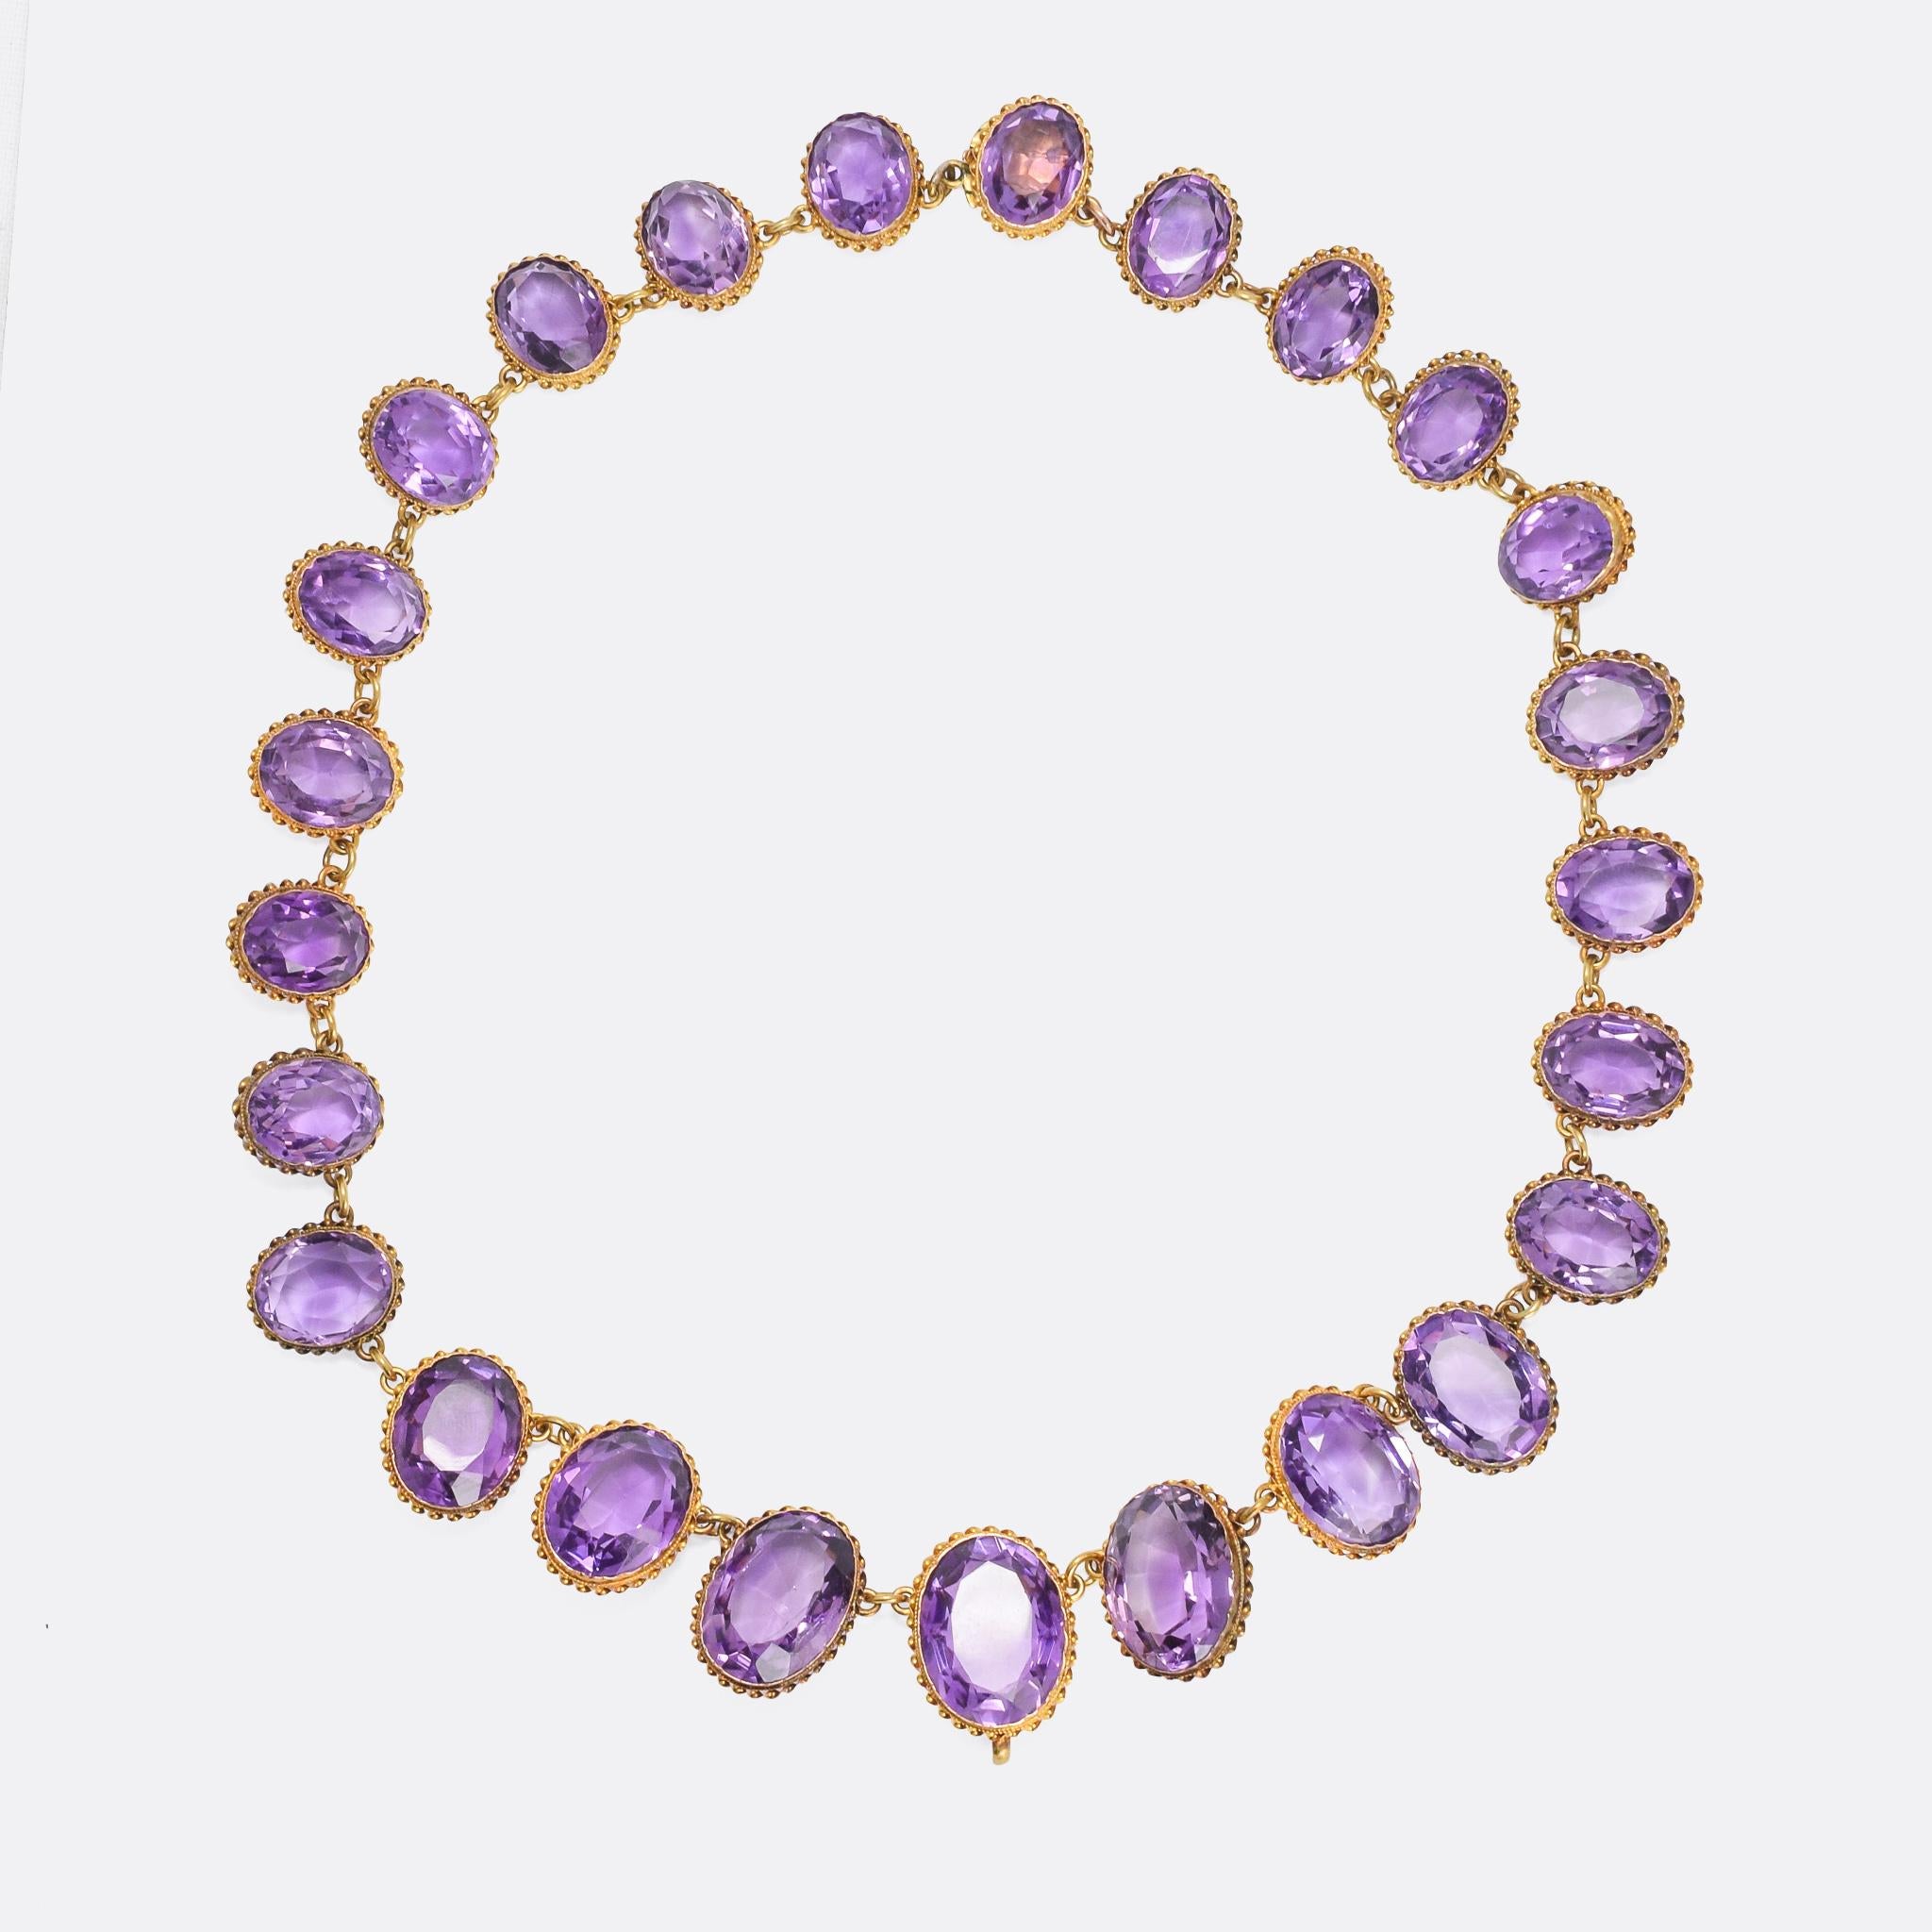 High Victorian Antique Victorian Amethyst Riviére Necklace and Earrings Suite